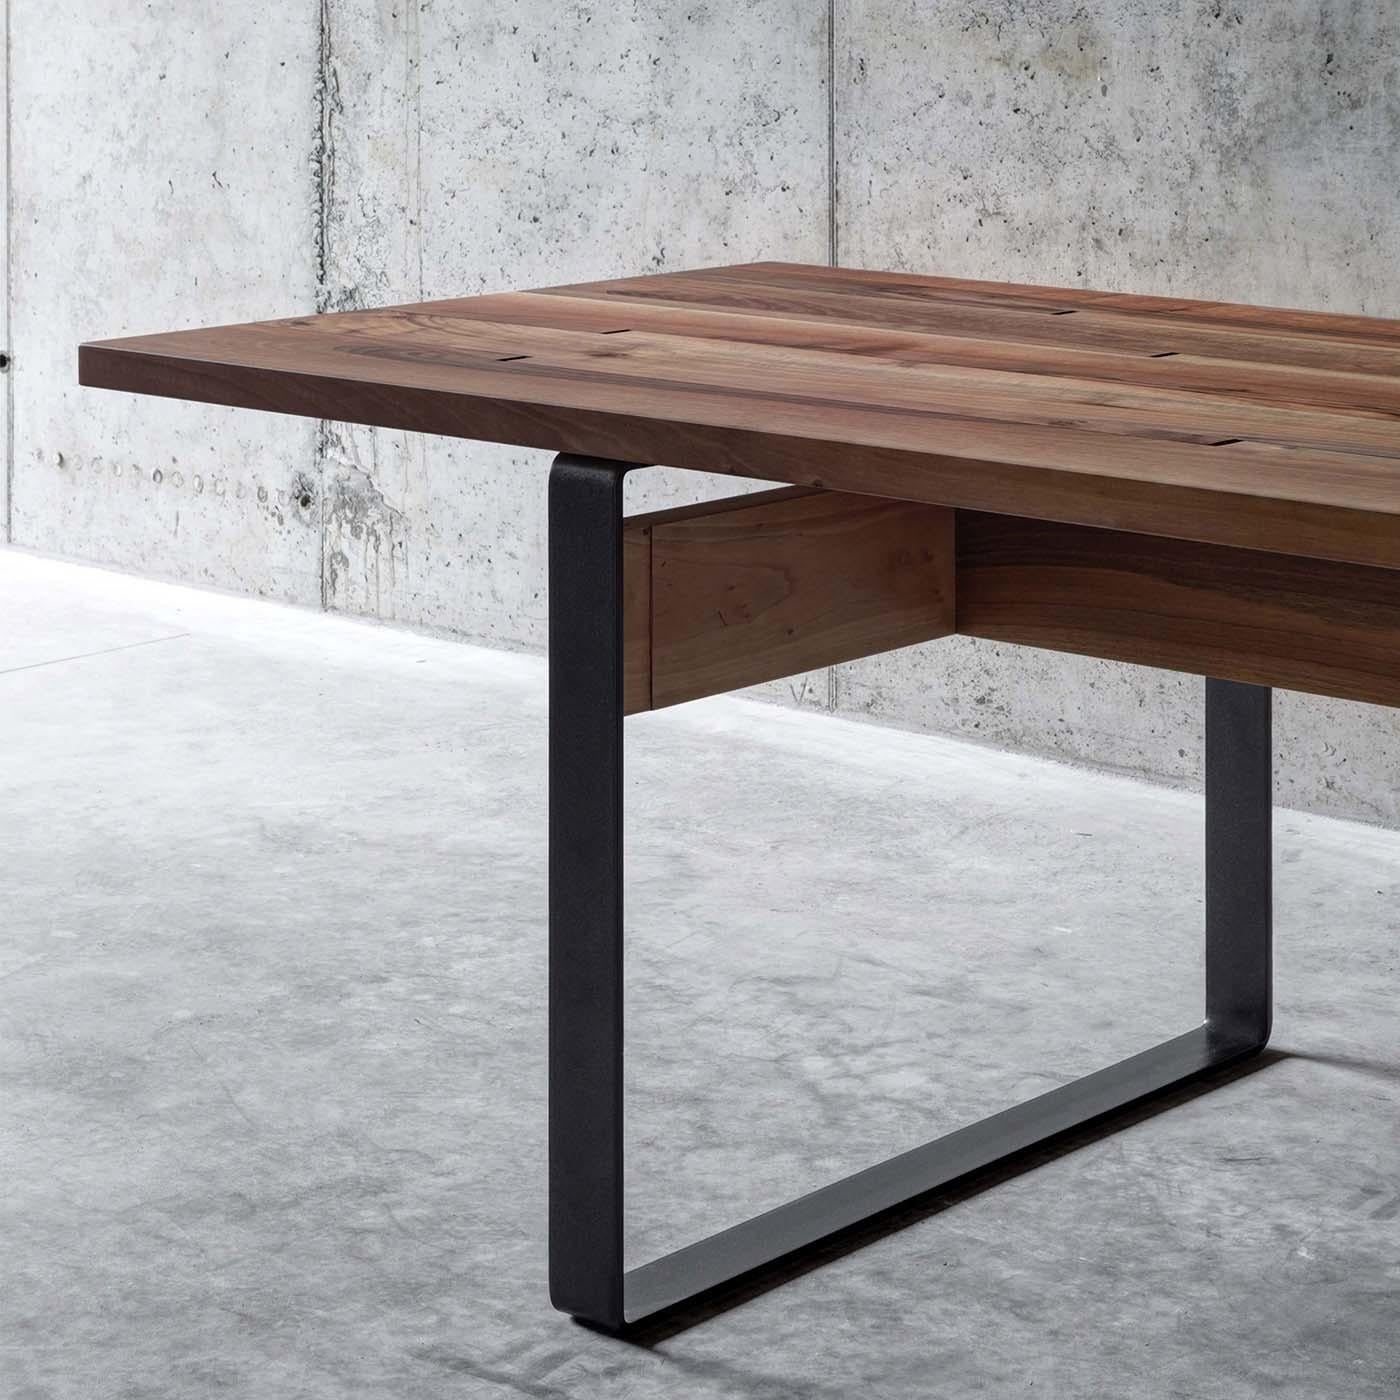 Designed by Act_Romegialli, this stunning dining table combines the warmth of walnut and the cool elegance of steel. The top showcases the unique grain of the wood and comprises five boards that were asymmetrically cut and assembled with an